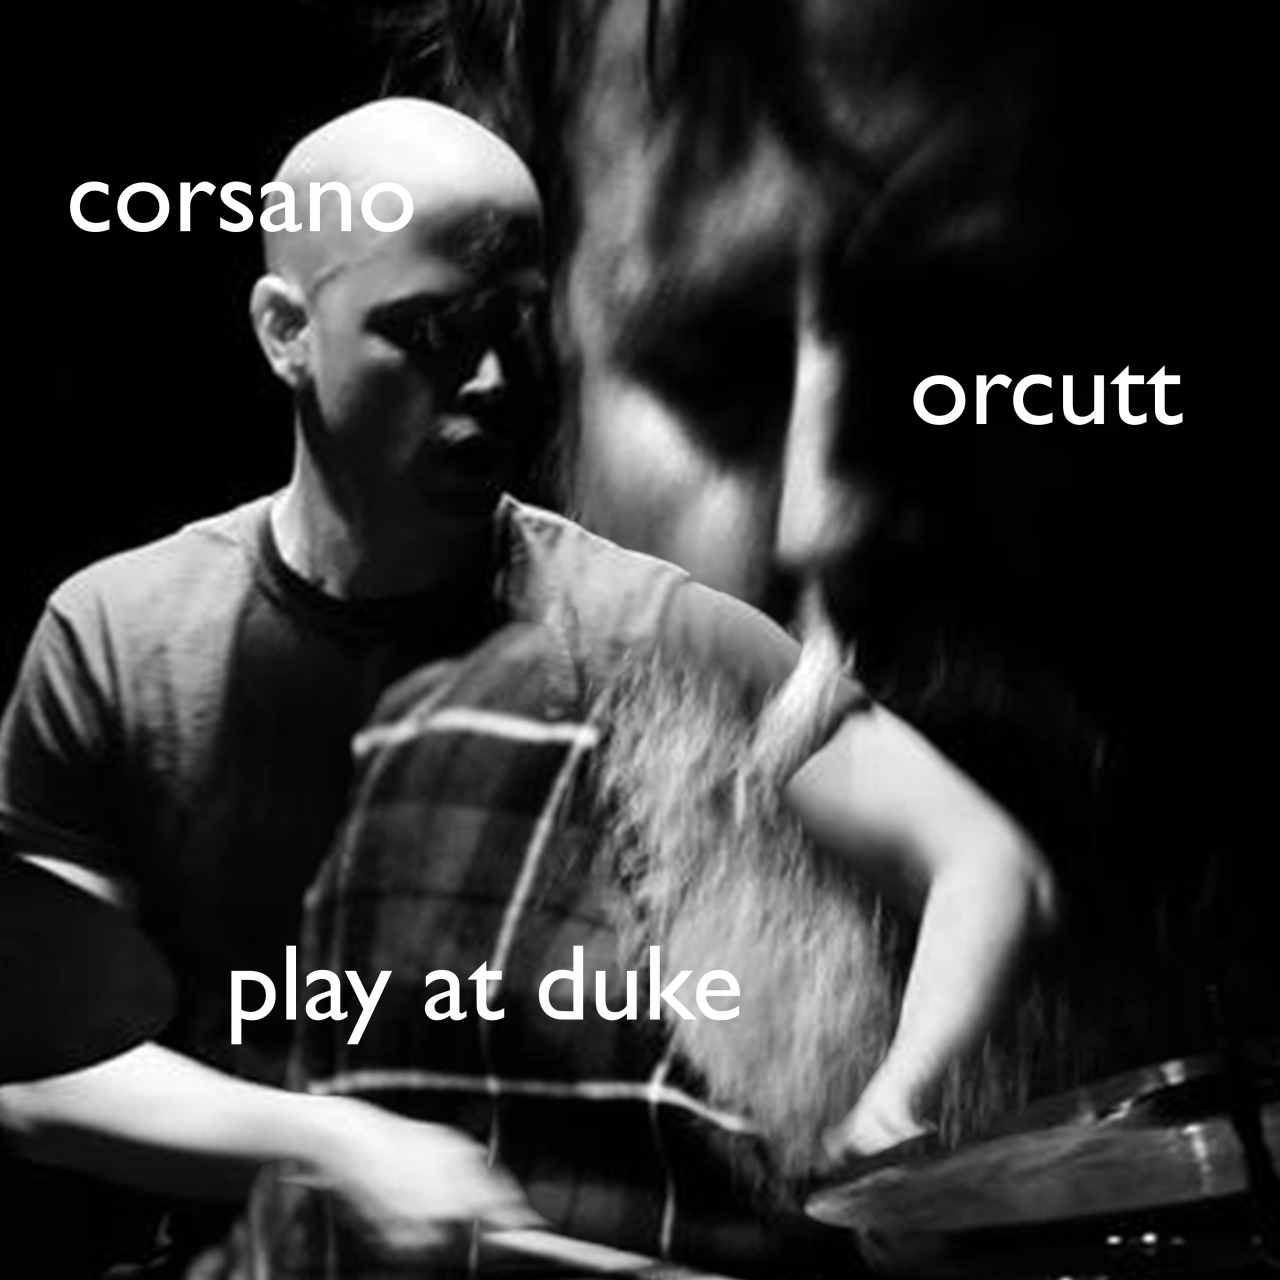 PAL-075 Chris Corsano and Bill Orcutt LP
“Play at Duke”
Play at Duke by Chris Corsano & Bill Orcutt
BUY LP
Few sounds in music are as instantly recognizable as the searching sting of guitarist Bill Orcutt and the cyclical propulsion of drummer Chris...